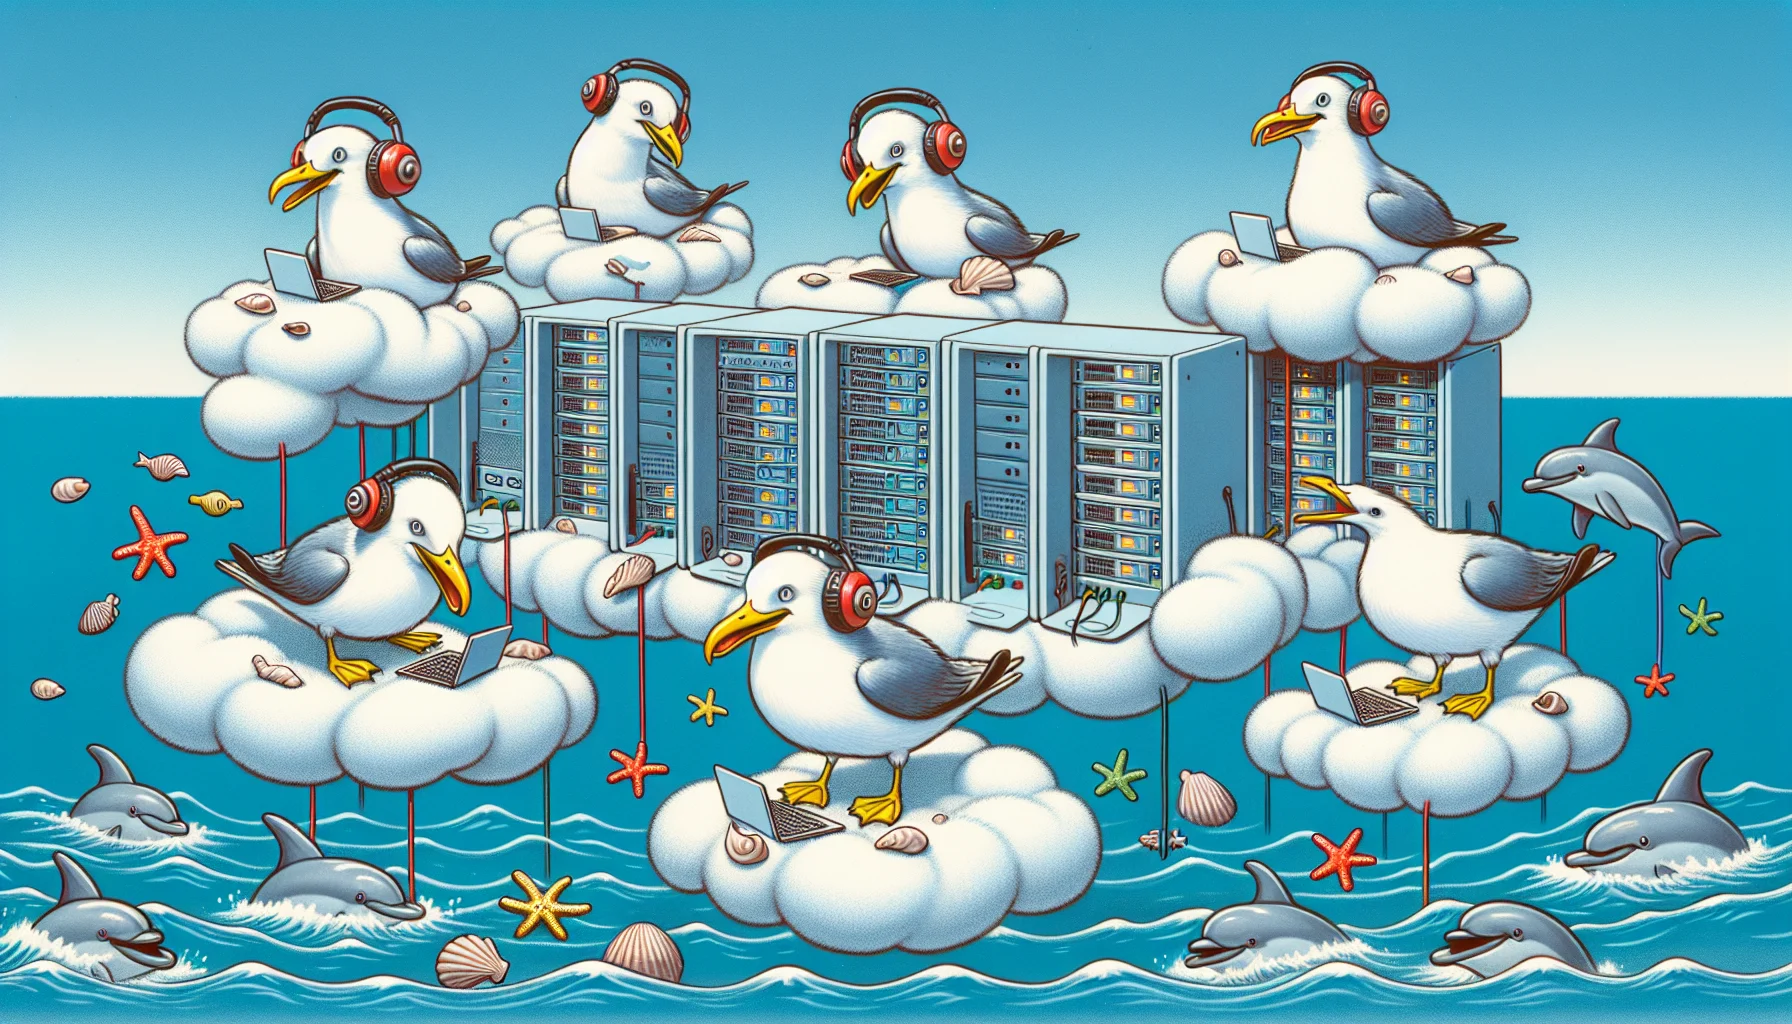 Create a humorous scene showcasing offshore cPanel hosting. There are a few seagulls wearing headphones, surrounded by floating cloud-shaped servers in an ocean setting. These seagulls are frantically clicking and typing on mock computer systems made from seashells and starfish. Each one of them is sitting on individual fluffy clouds acting as floating desks. Below them, happy dolphins are playing amongst the waves, poking their heads out of the water to observe the seagulls' antics. Use this as an abstract and funny representation of web hosting services.